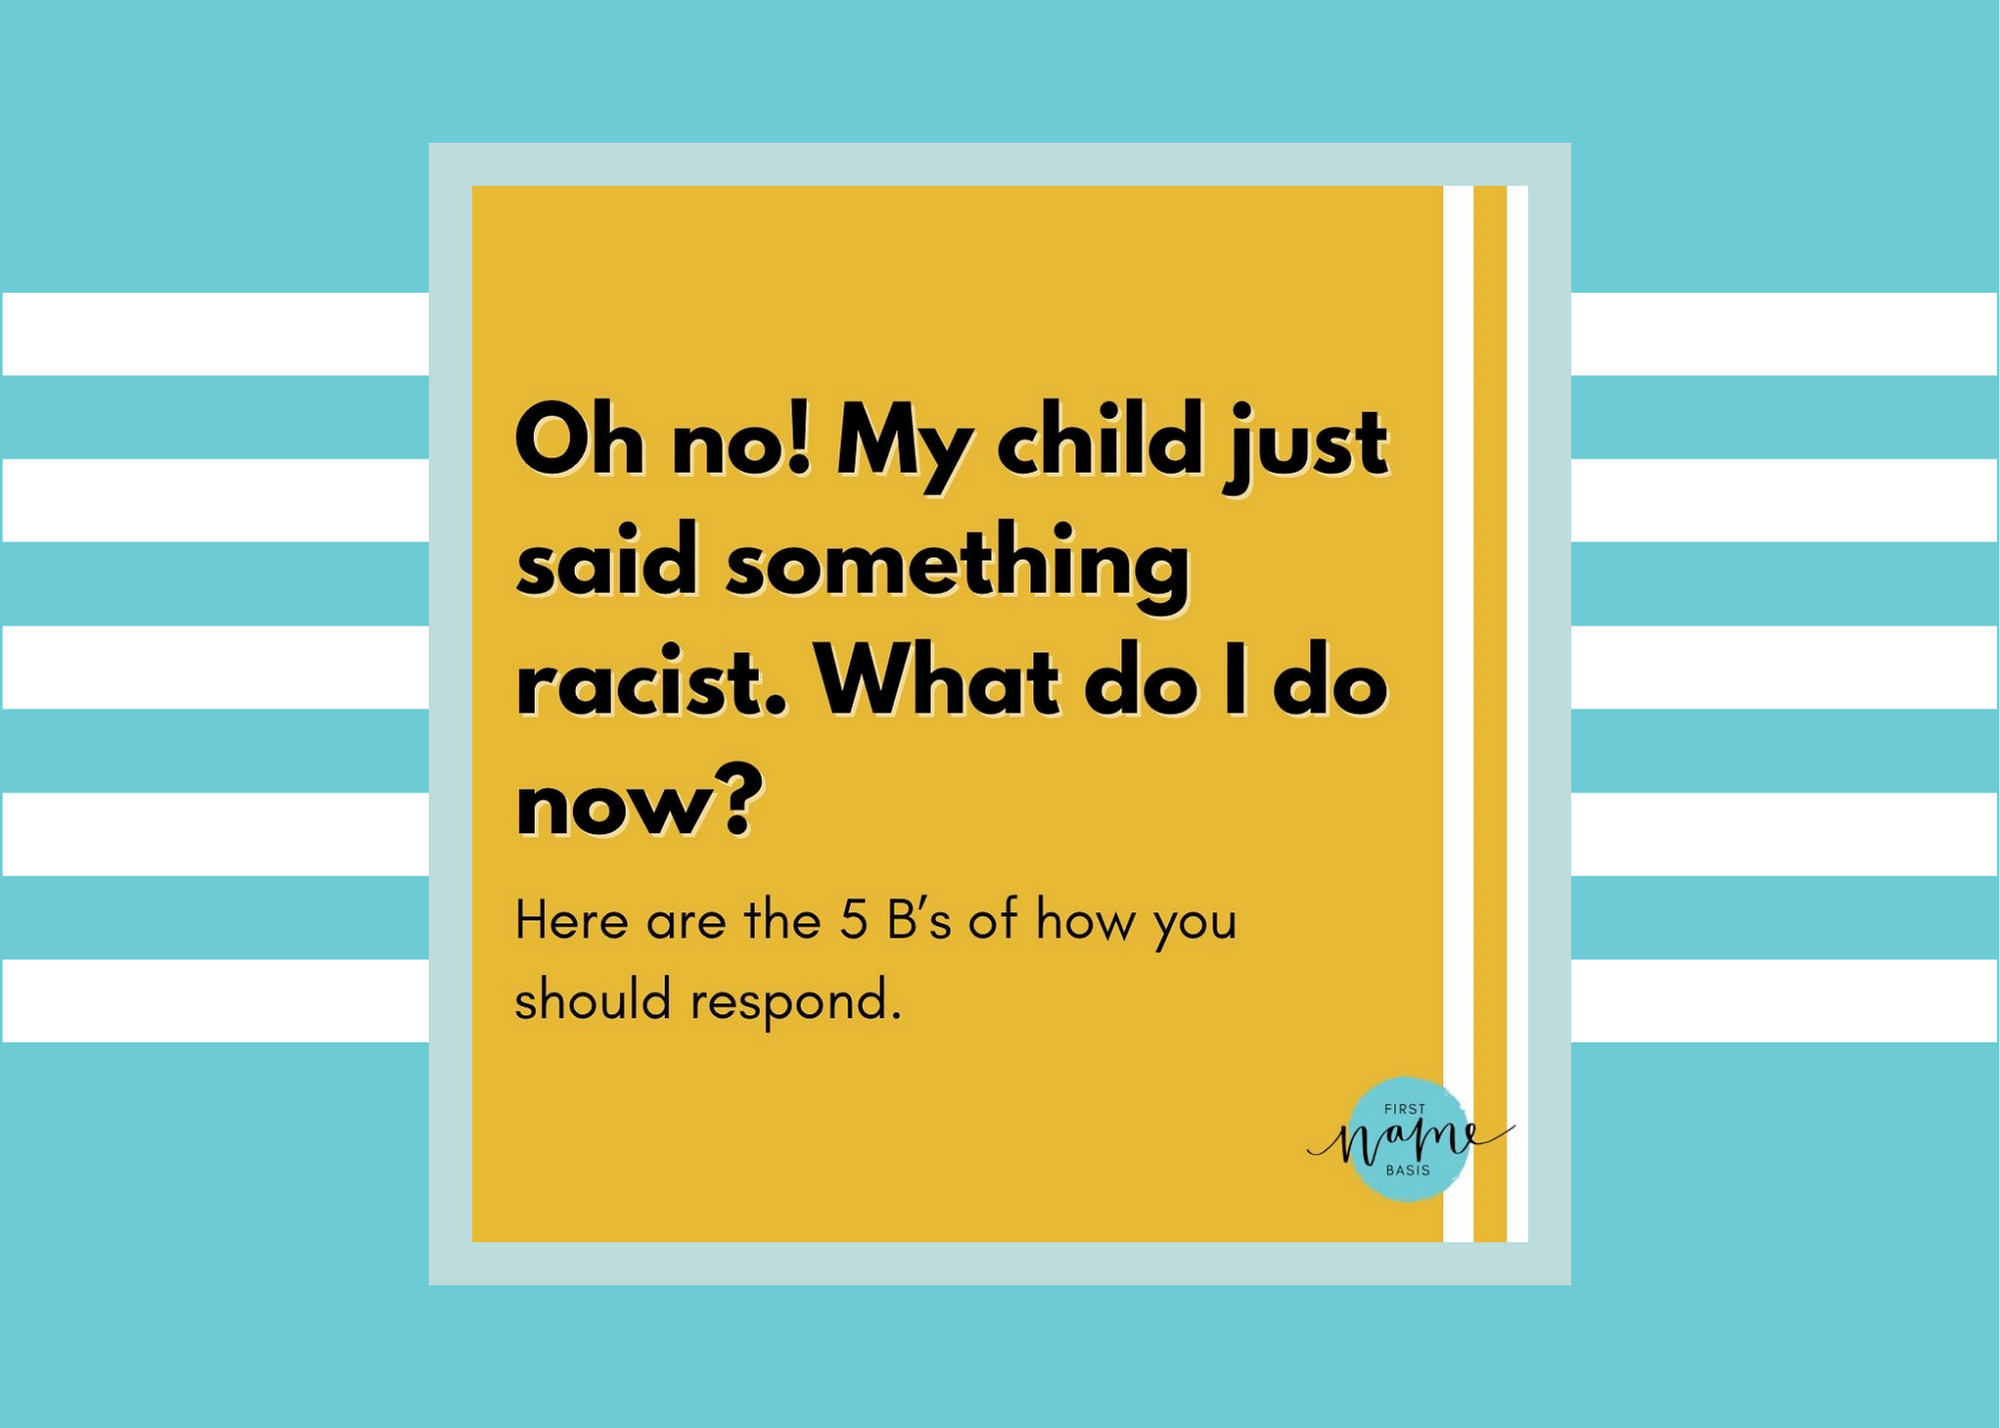 My Child Just Said Something Racist. What Do I Do?